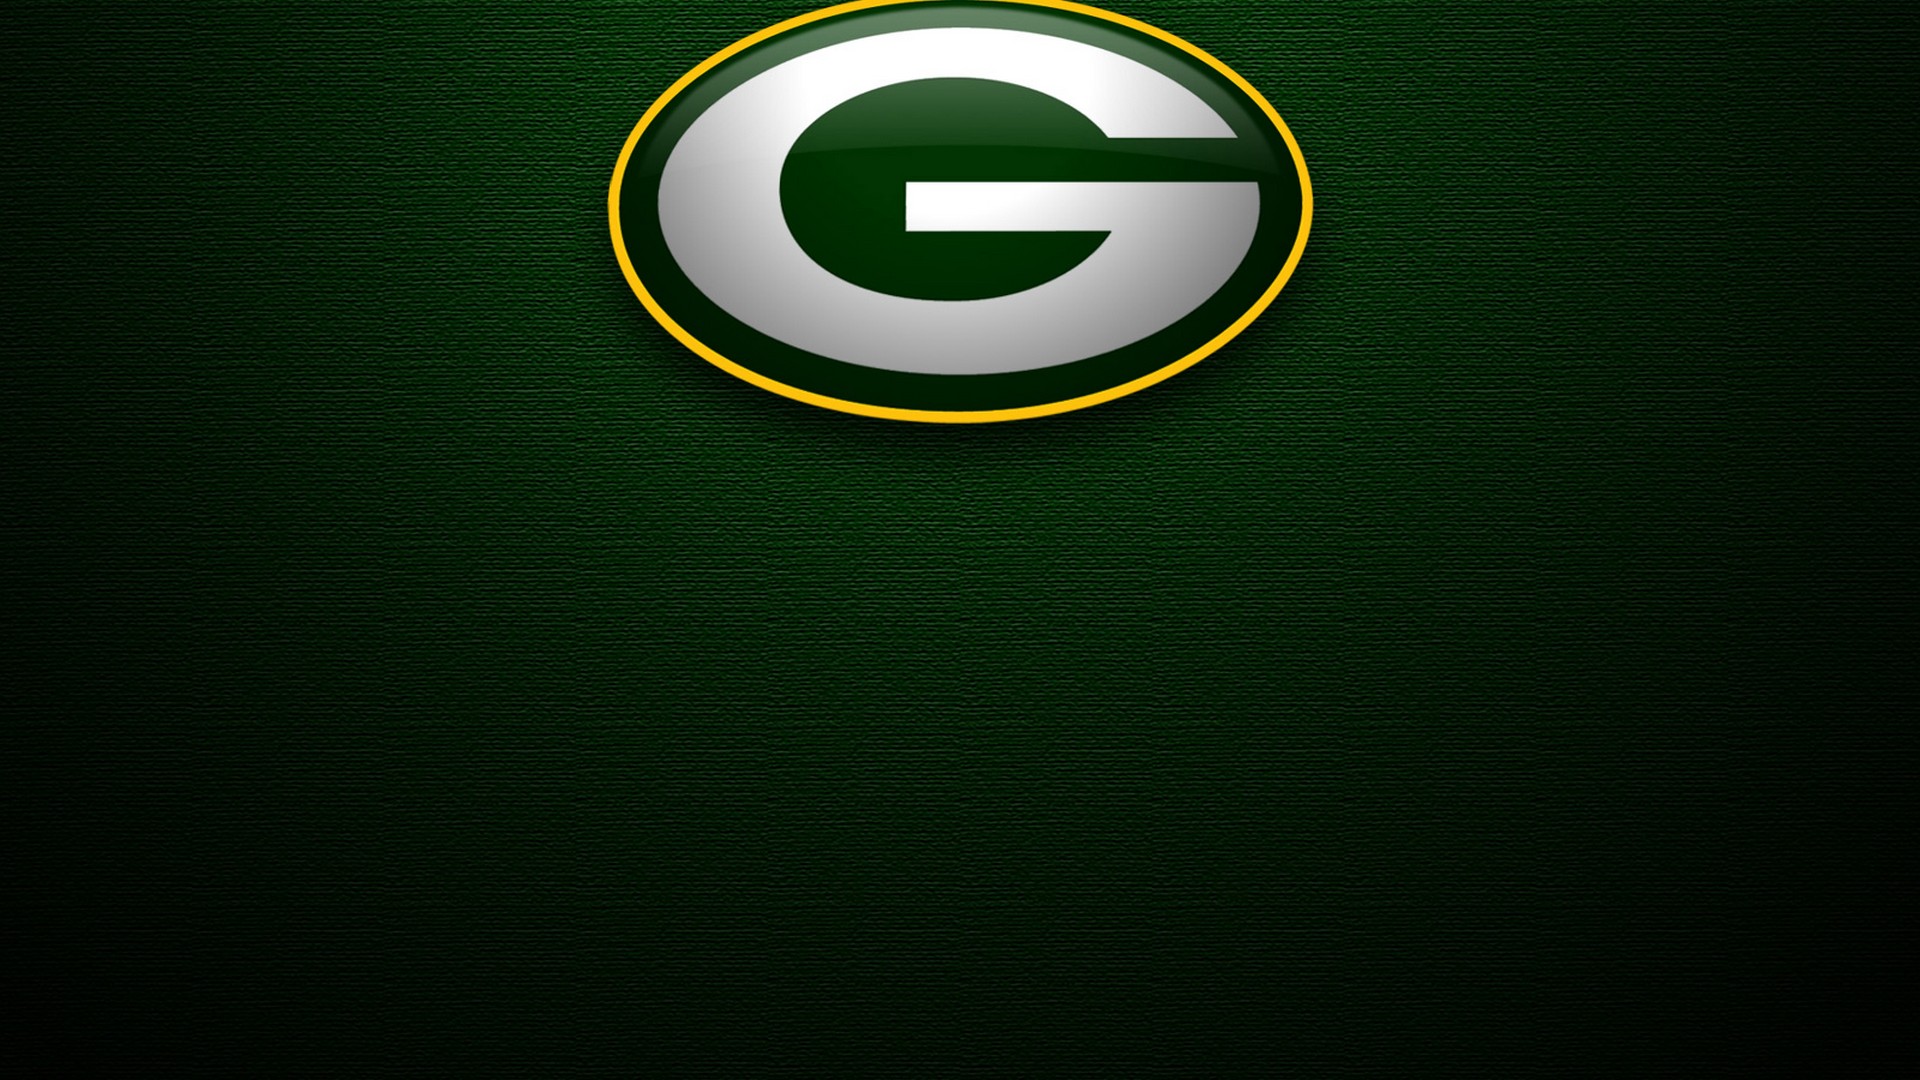 Green Bay Packers NFL Desktop Wallpaper With Resolution 1920X1080 pixel. You can make this wallpaper for your Mac or Windows Desktop Background, iPhone, Android or Tablet and another Smartphone device for free